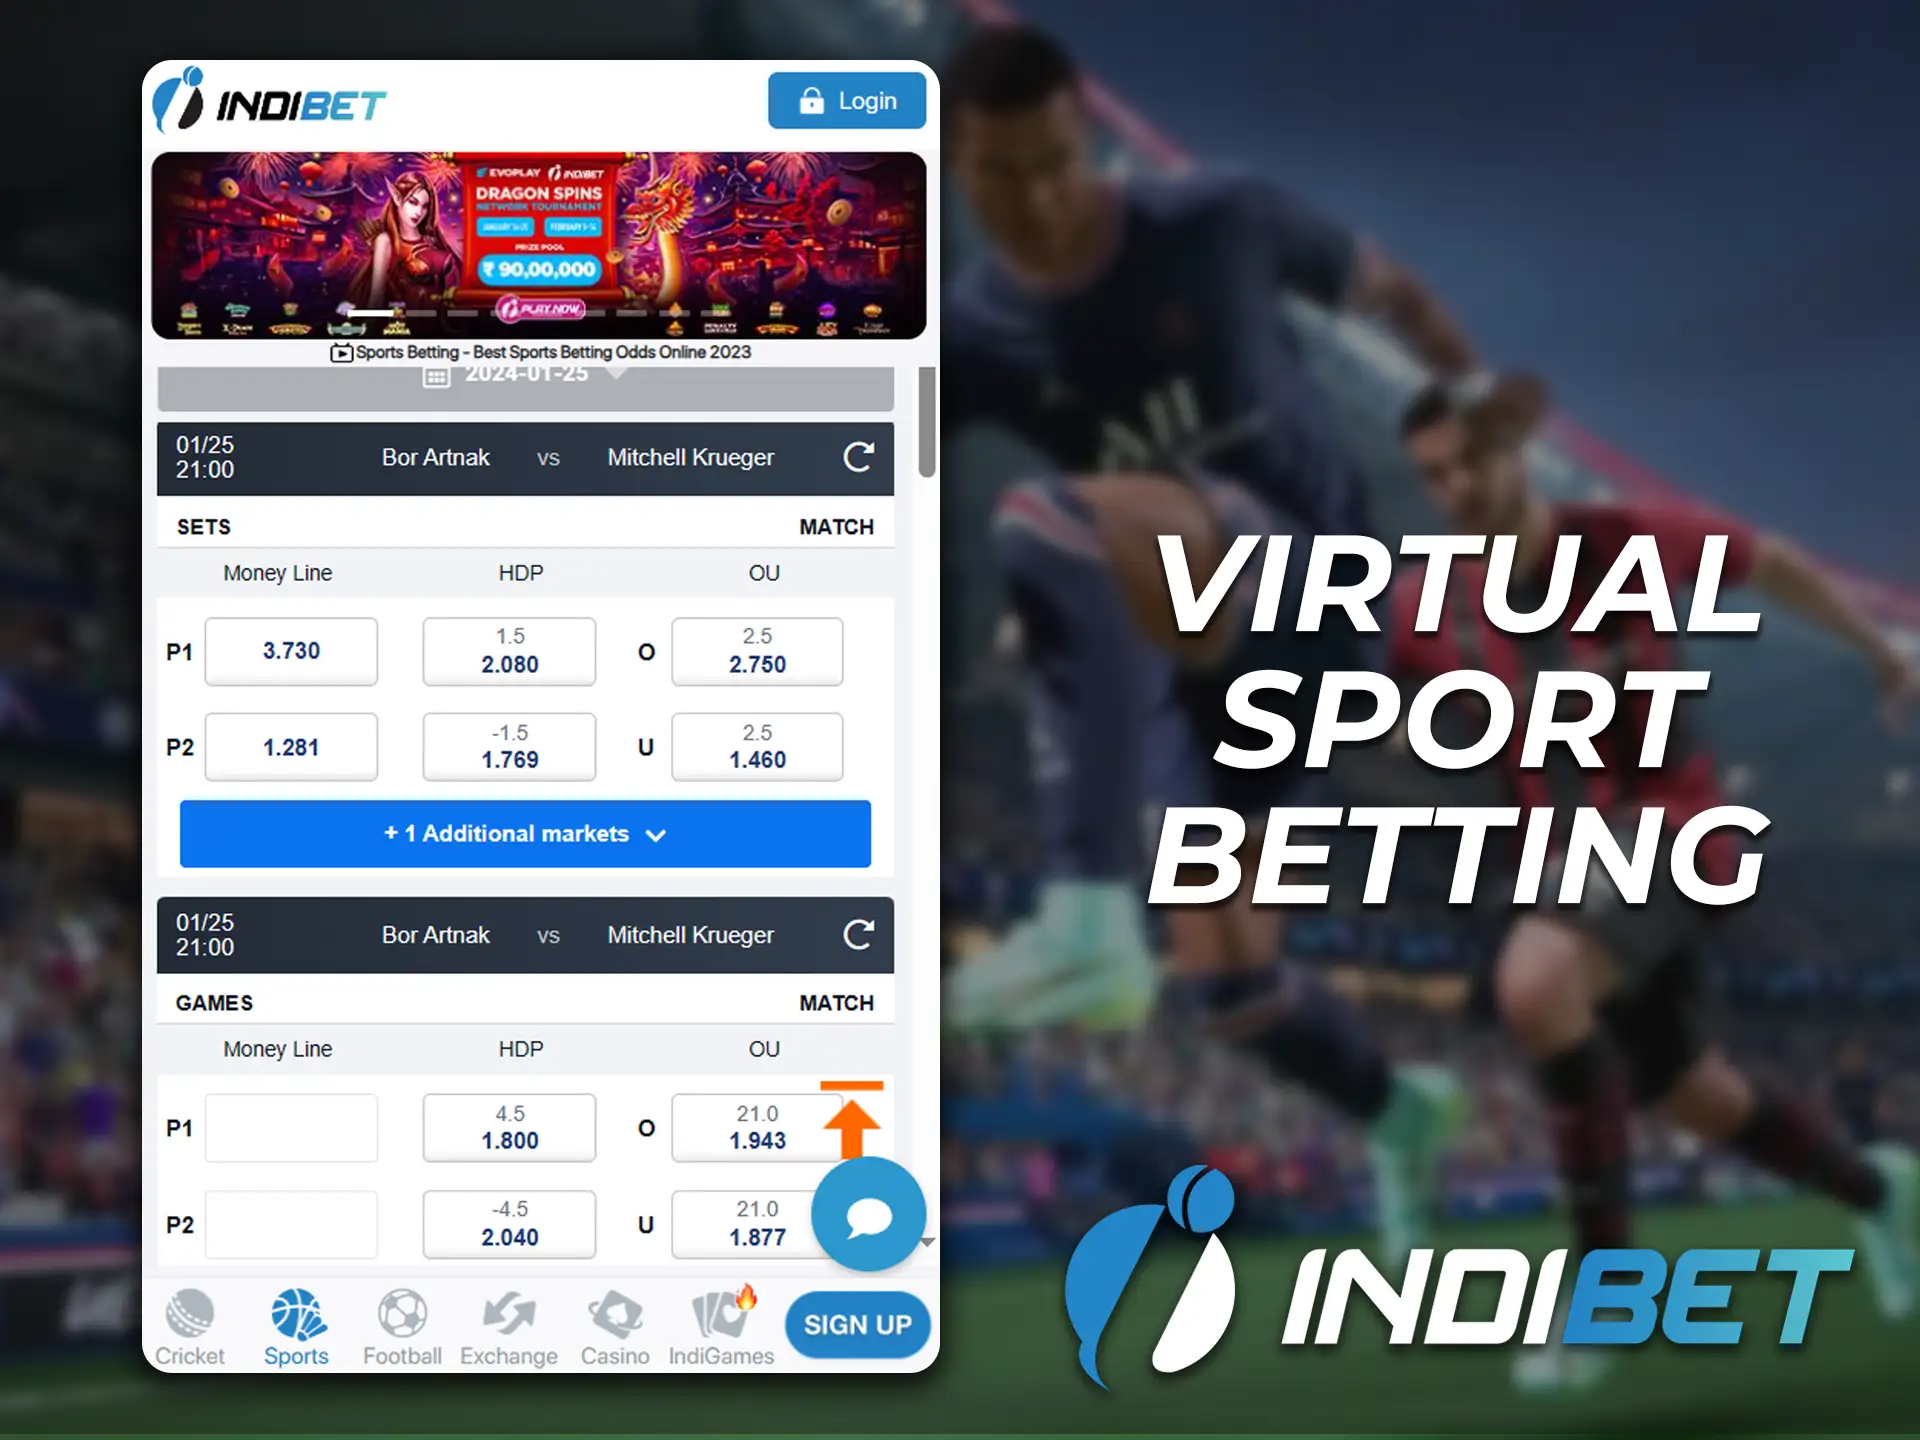 Betting on virtual sports is popular among Indian players on the Indibet app.